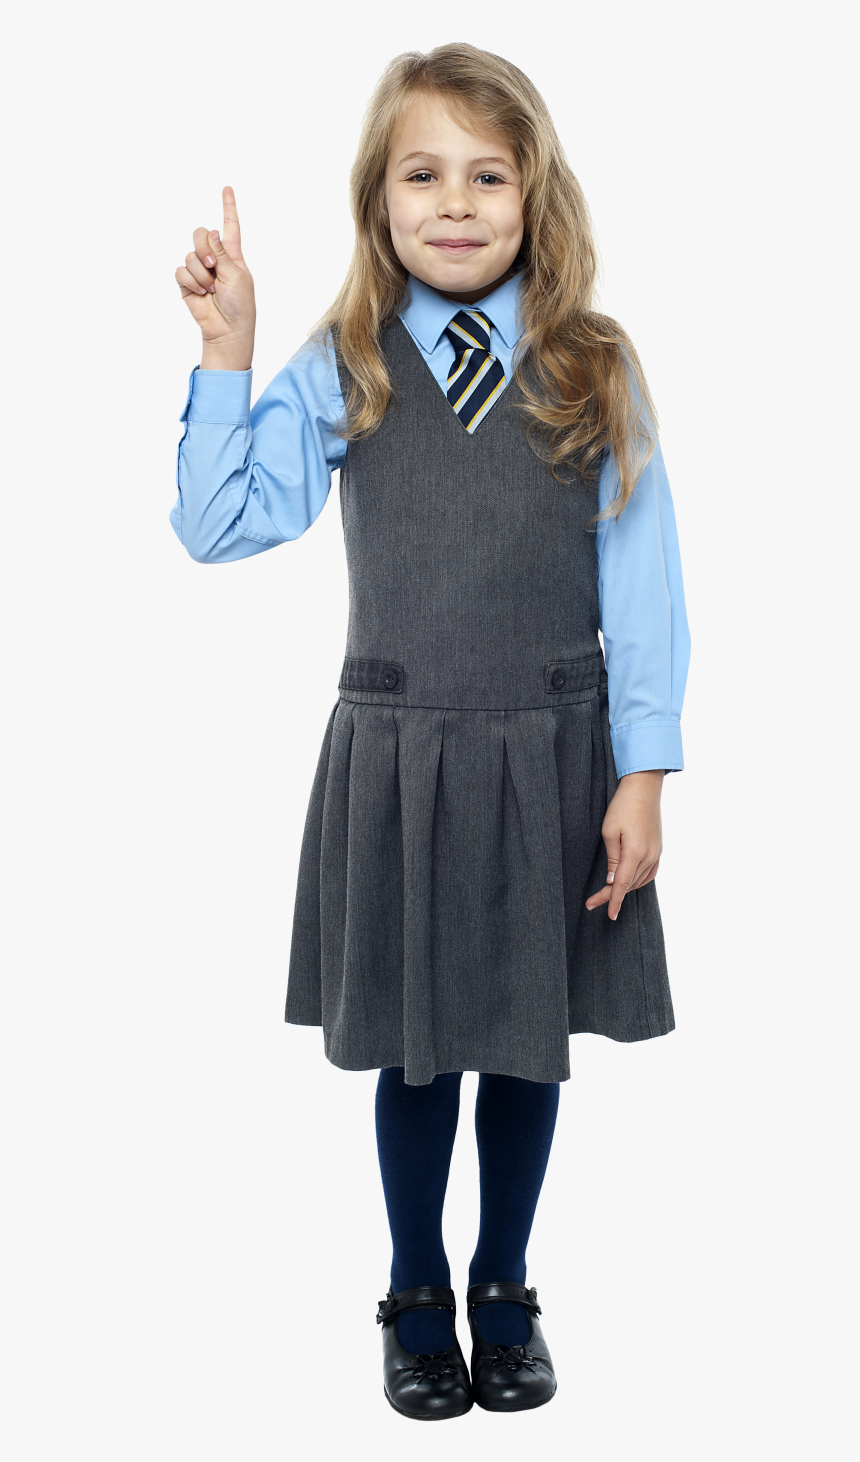 School Girl Png Image - School Girl Clear Background, Transparent Png, Free Download